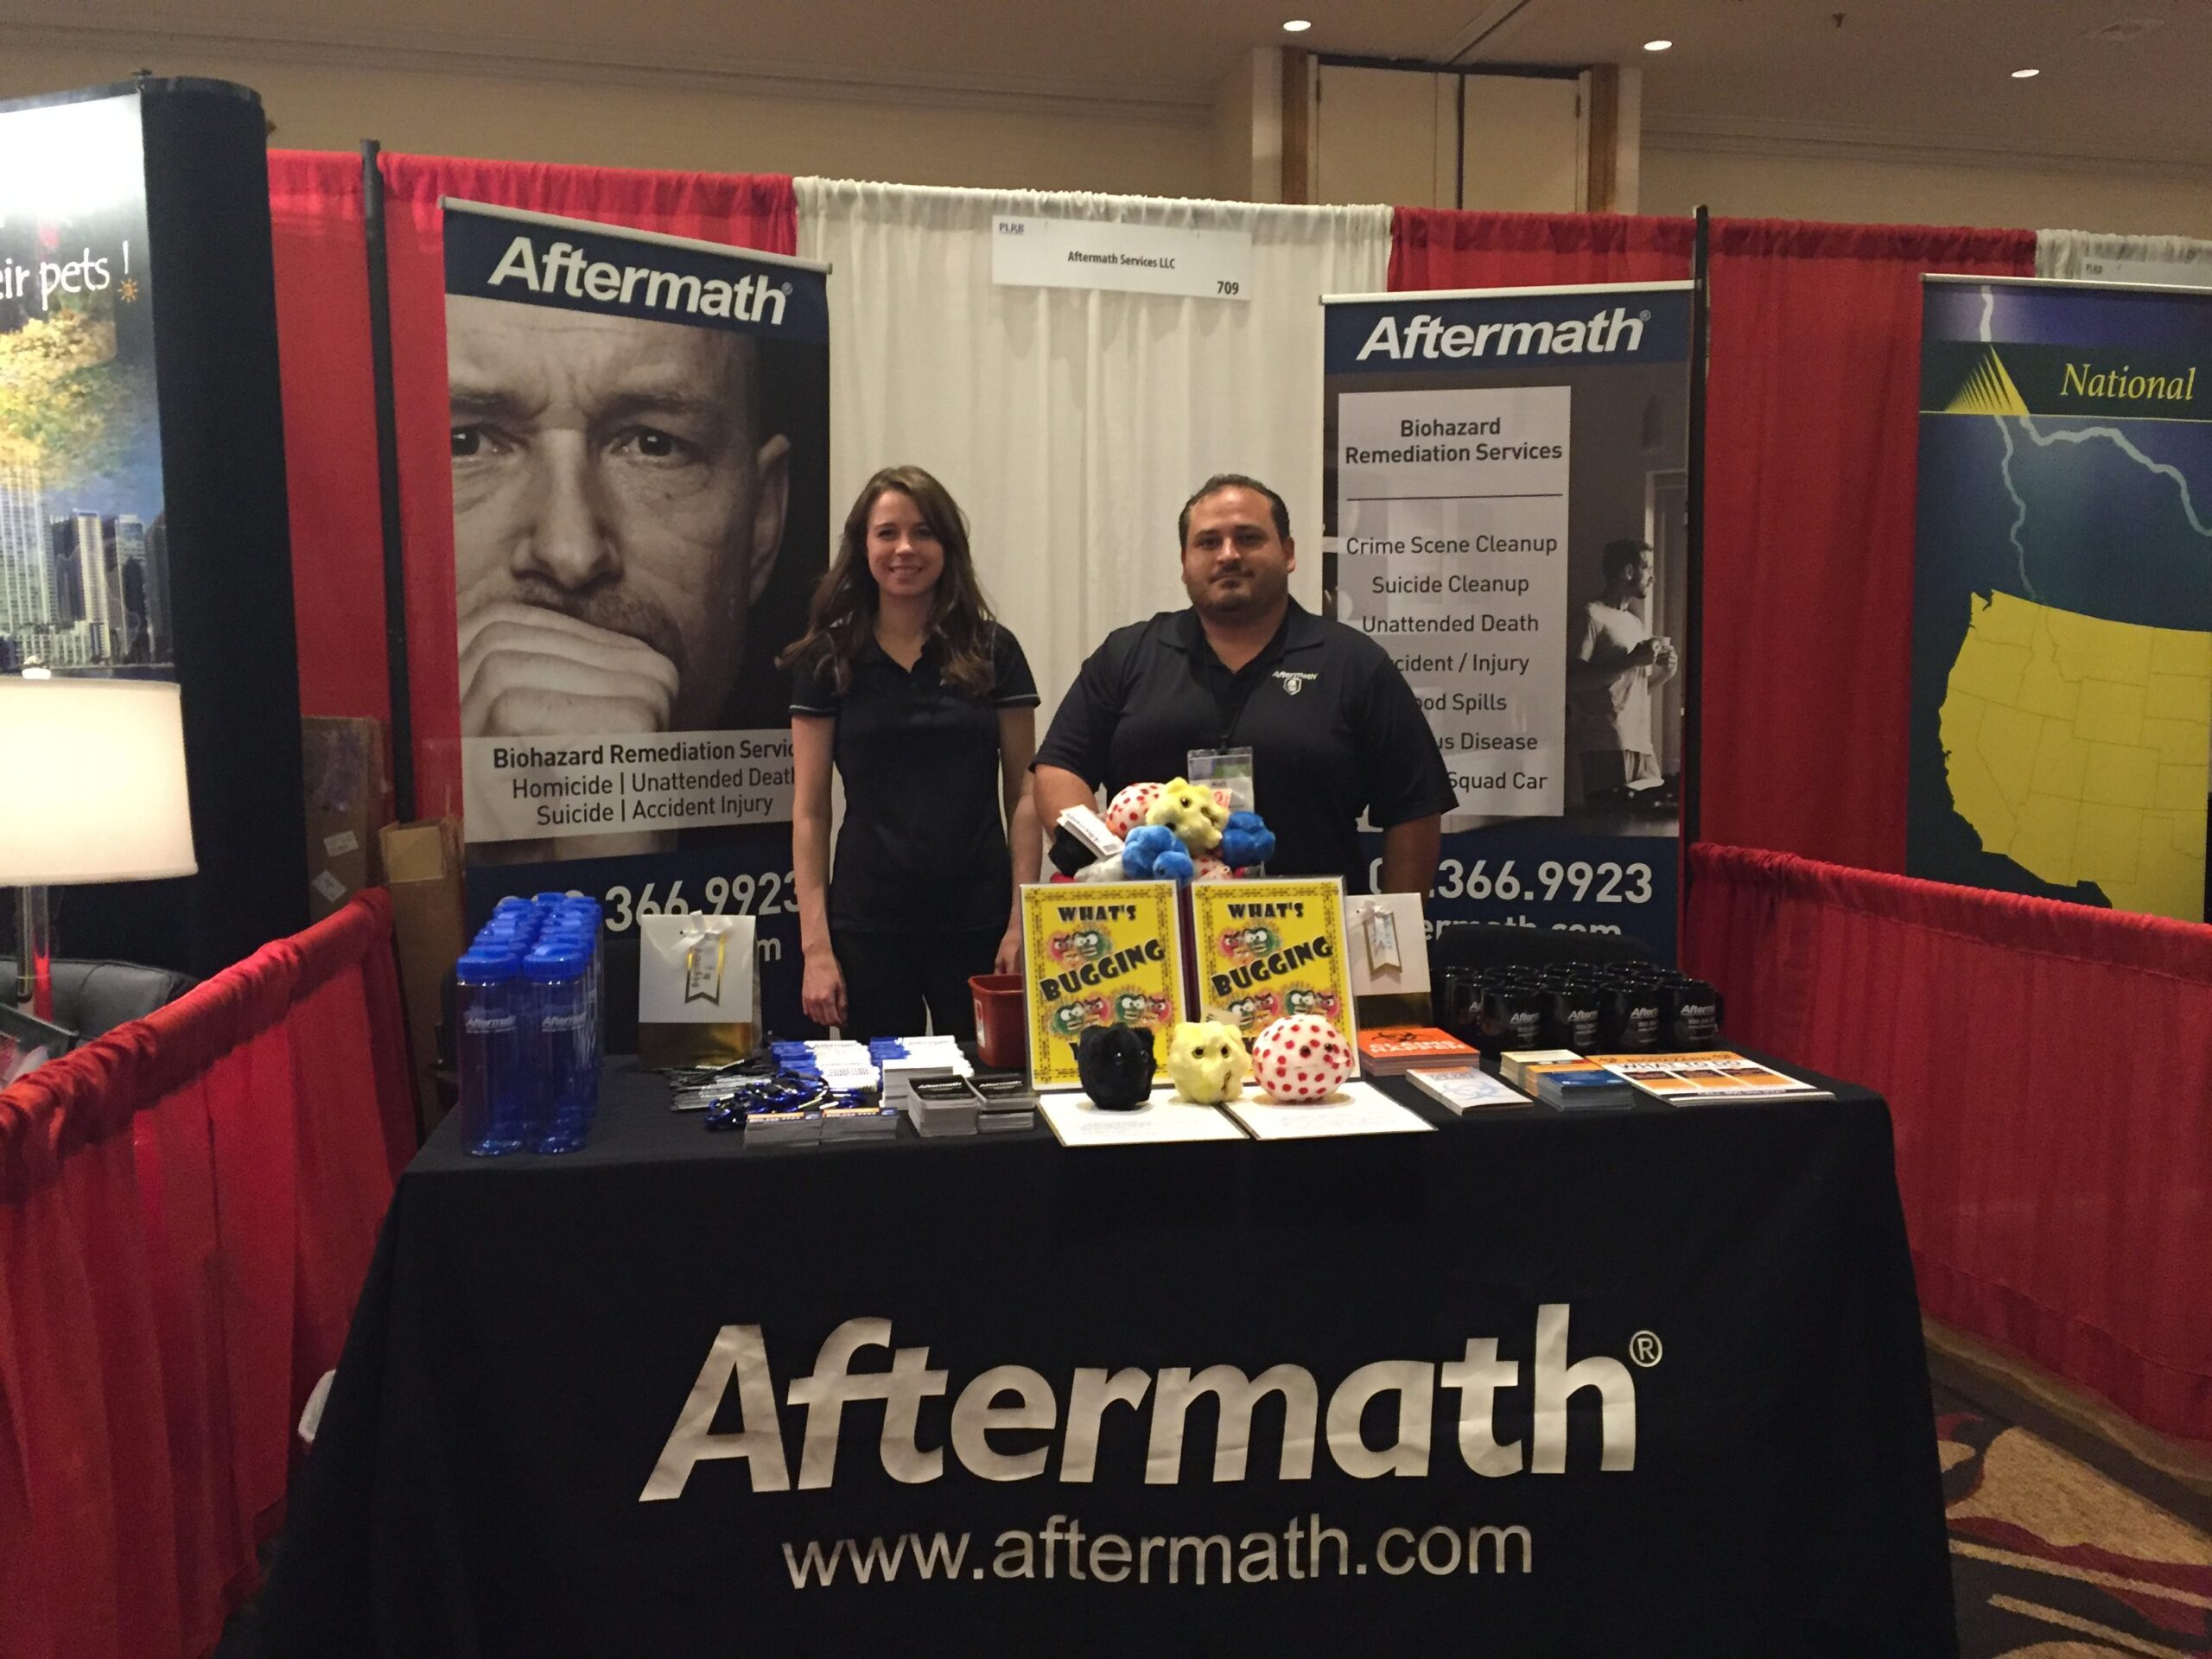 PLRB 2016 Aftermath Booth.